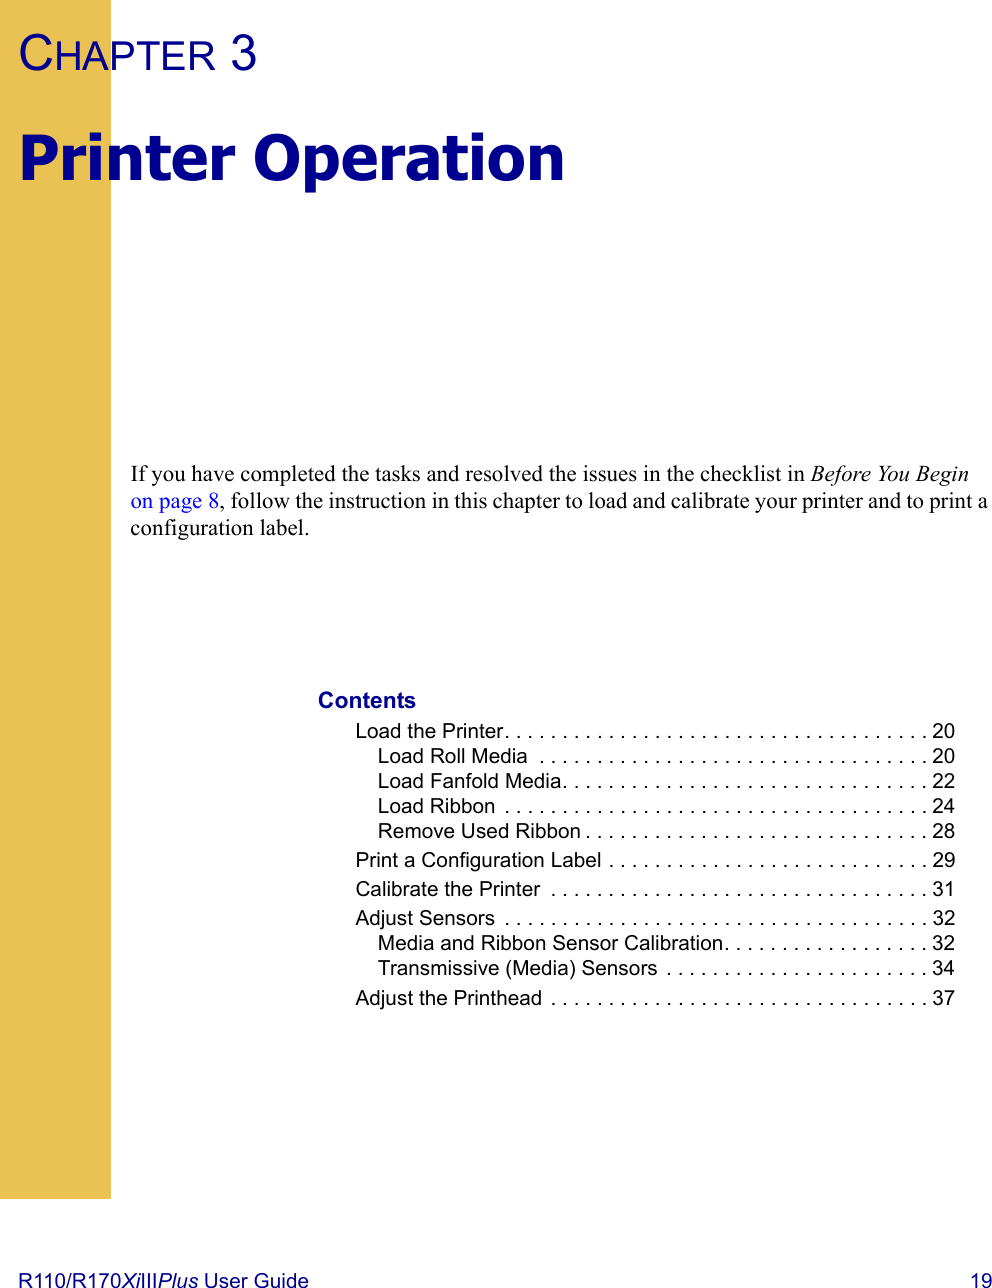 R110/R170XiIIIPlus User Guide  19CHAPTER 3Printer OperationIf you have completed the tasks and resolved the issues in the checklist in Before You Begin on page 8, follow the instruction in this chapter to load and calibrate your printer and to print a configuration label.ContentsLoad the Printer. . . . . . . . . . . . . . . . . . . . . . . . . . . . . . . . . . . . . 20Load Roll Media  . . . . . . . . . . . . . . . . . . . . . . . . . . . . . . . . . . 20Load Fanfold Media. . . . . . . . . . . . . . . . . . . . . . . . . . . . . . . . 22Load Ribbon  . . . . . . . . . . . . . . . . . . . . . . . . . . . . . . . . . . . . . 24Remove Used Ribbon . . . . . . . . . . . . . . . . . . . . . . . . . . . . . . 28Print a Configuration Label . . . . . . . . . . . . . . . . . . . . . . . . . . . . 29Calibrate the Printer  . . . . . . . . . . . . . . . . . . . . . . . . . . . . . . . . . 31Adjust Sensors  . . . . . . . . . . . . . . . . . . . . . . . . . . . . . . . . . . . . . 32Media and Ribbon Sensor Calibration. . . . . . . . . . . . . . . . . . 32Transmissive (Media) Sensors  . . . . . . . . . . . . . . . . . . . . . . . 34Adjust the Printhead  . . . . . . . . . . . . . . . . . . . . . . . . . . . . . . . . . 37 